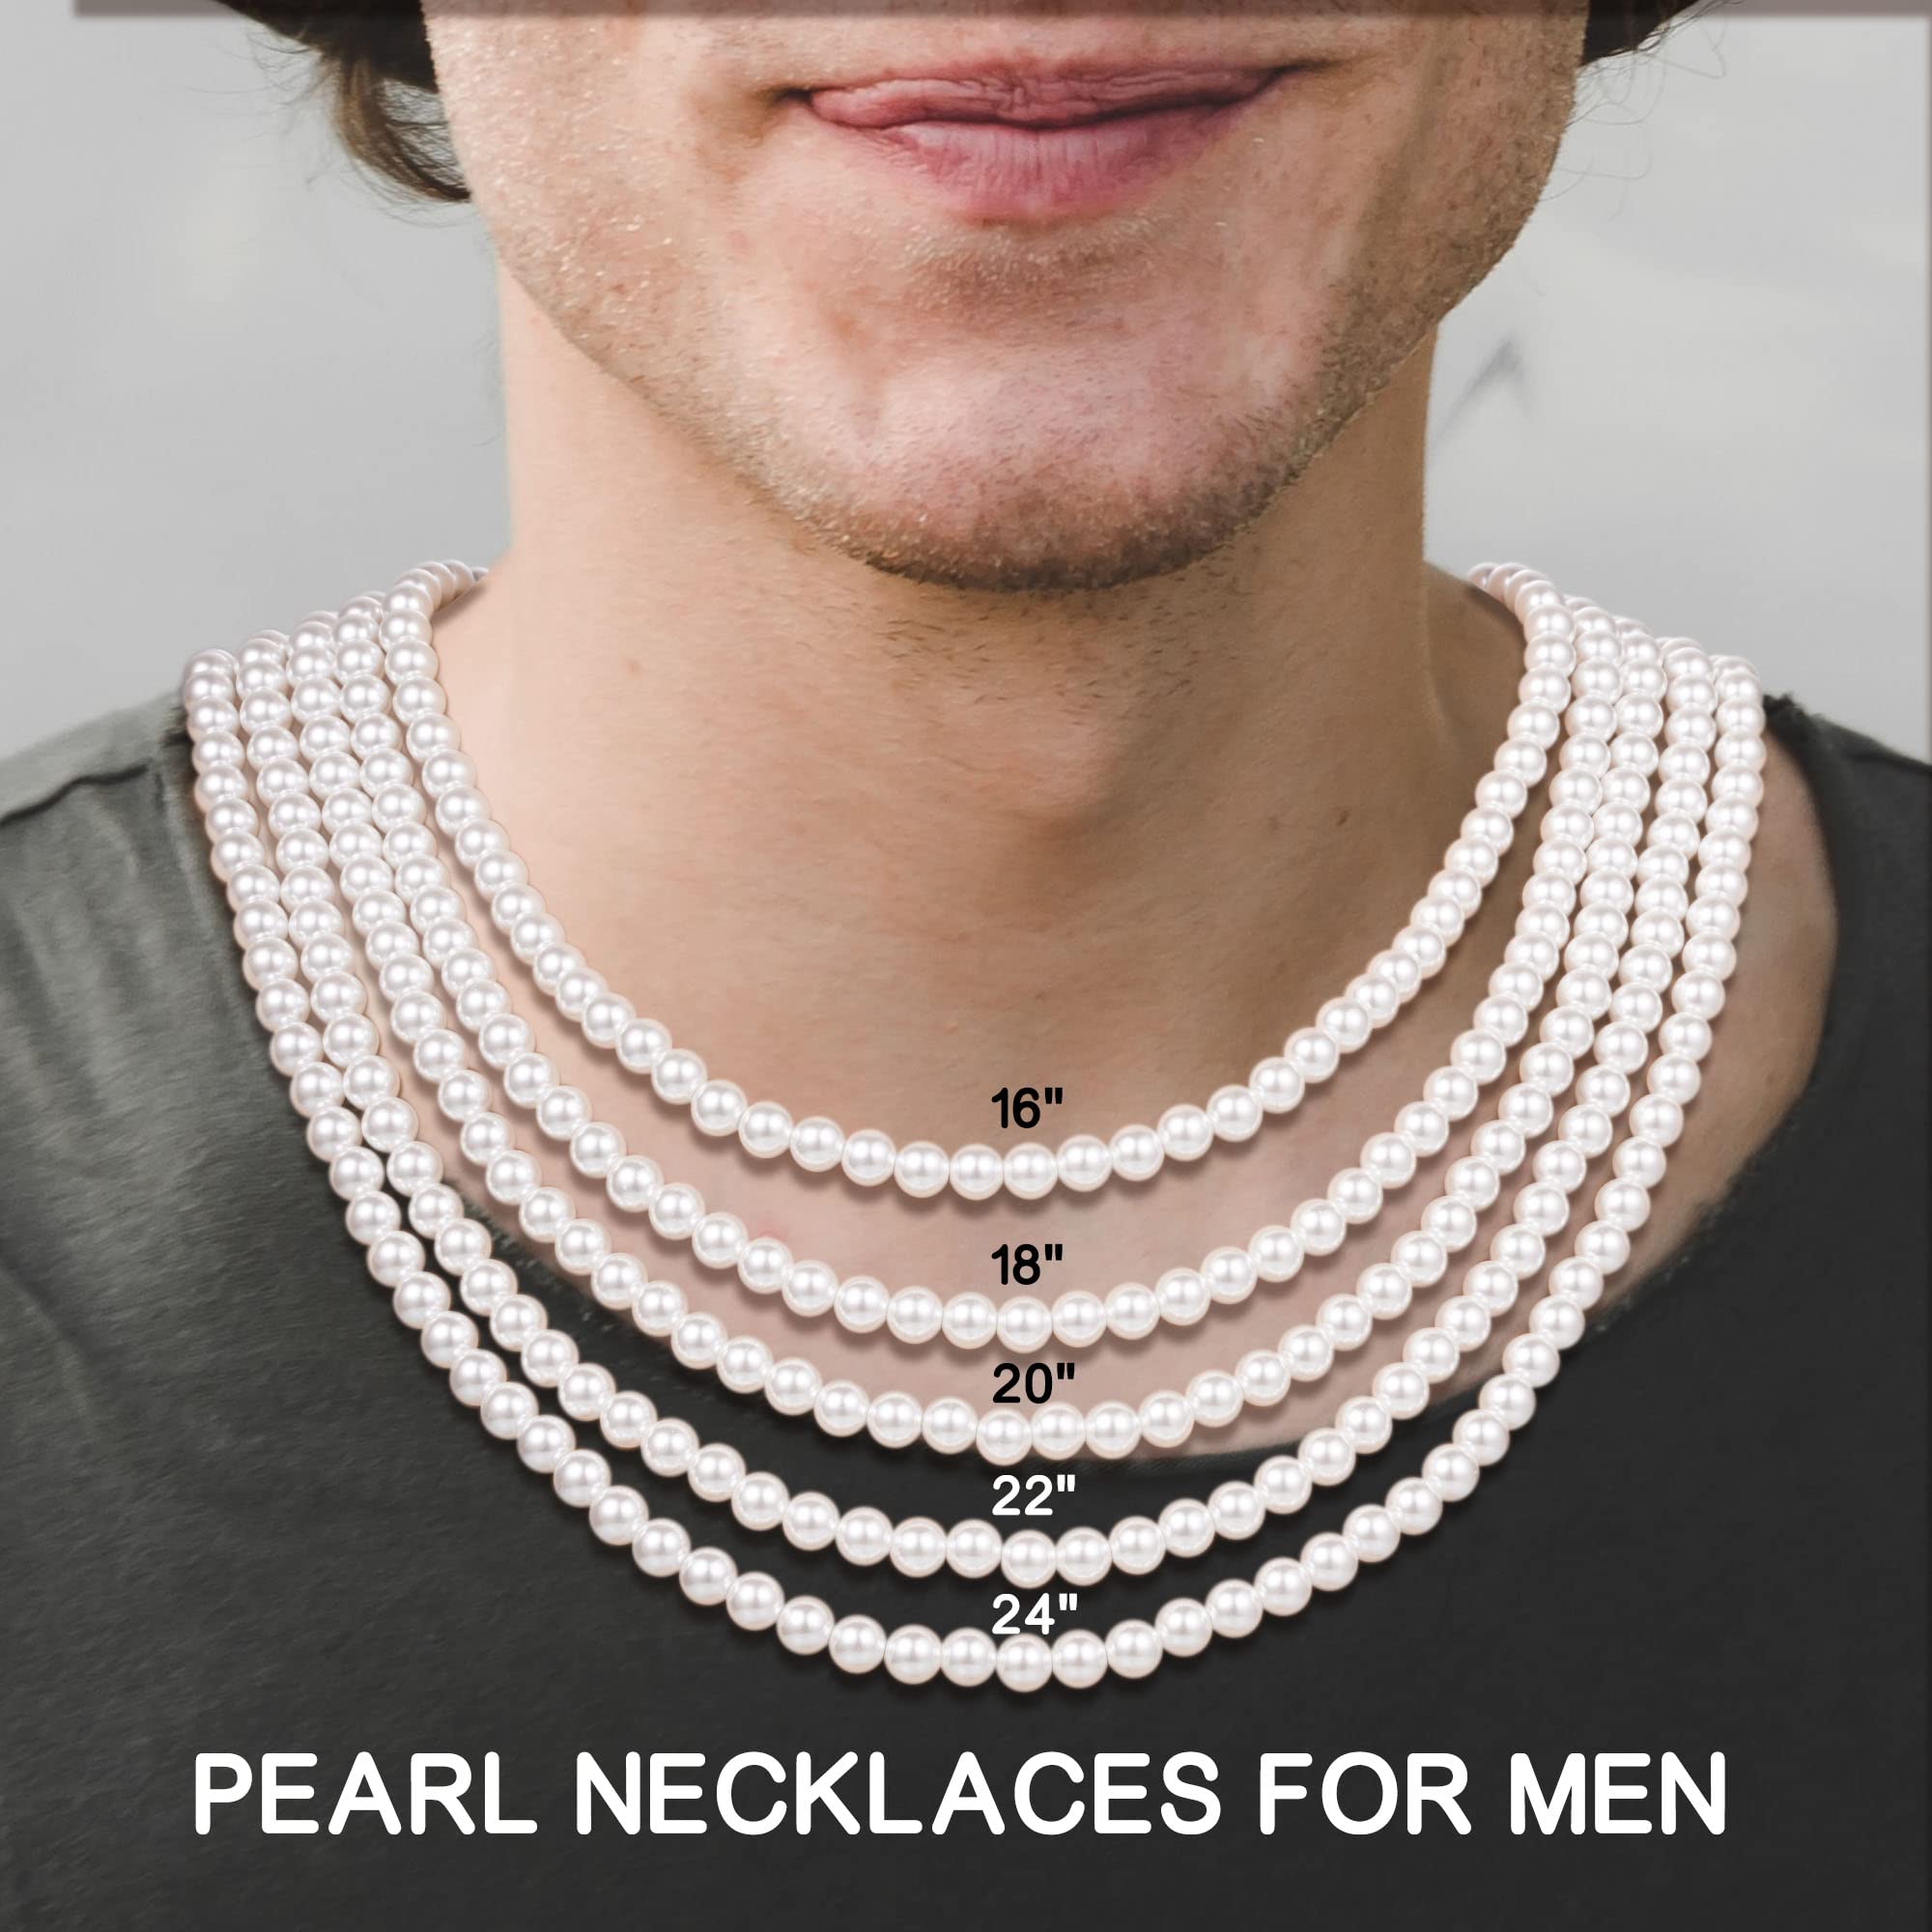 Mens Pearl Necklace 6mm 8mm White Round Pearl Necklace for Men Pearl Choker  Necklace Fashion Jewelry Gifts for Women Men Teens | Amazon.com